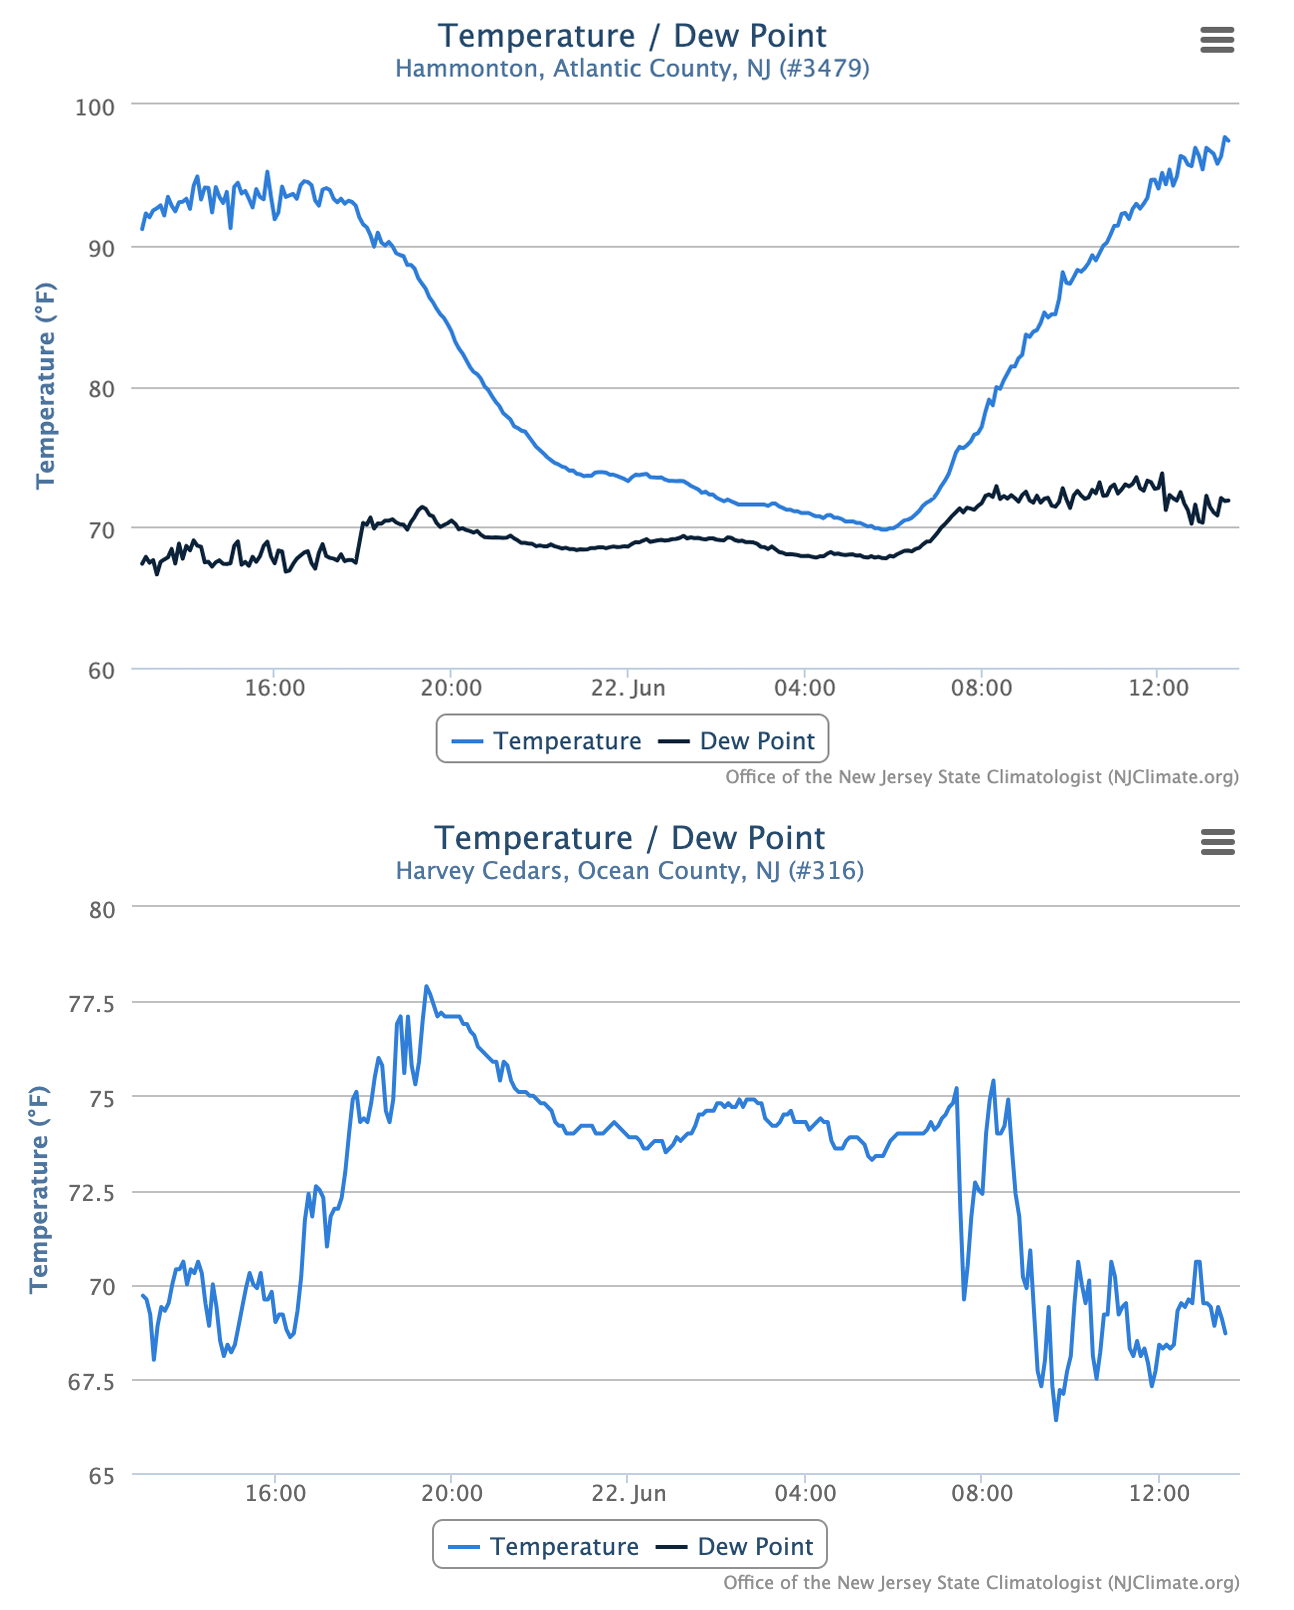 Time series of temperature and dew point at the Hammonton (top) and temperature at the Harvey Cedars (bottom) NJWxNet stations from approximately 2:00 PM on June 21st to 2:00 PM on June 22nd.